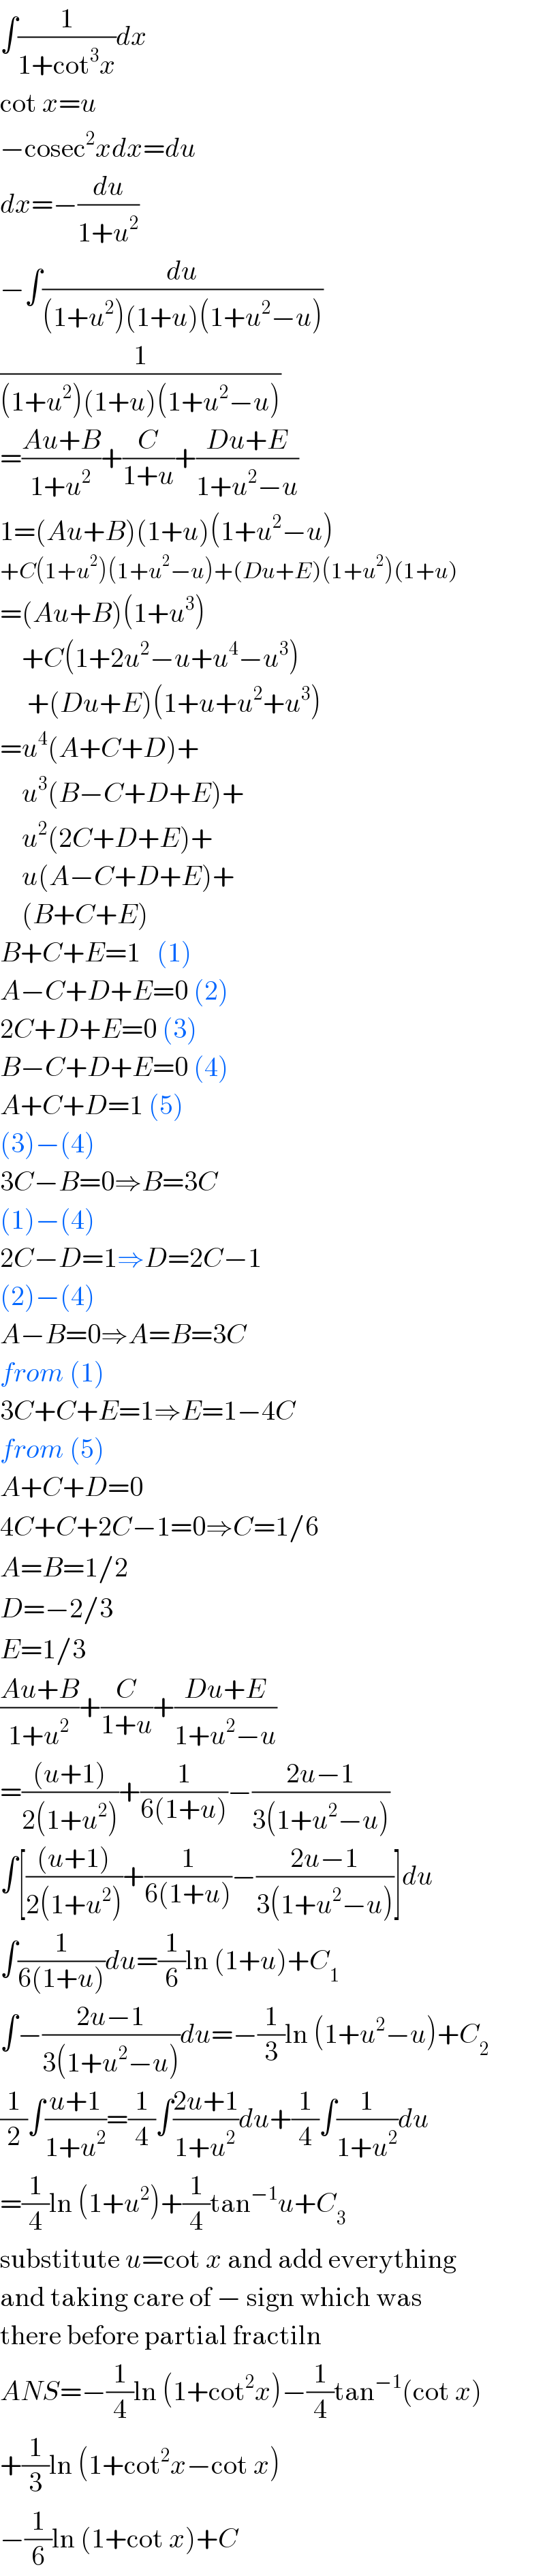 ∫(1/(1+cot^3 x))dx  cot x=u  −cosec^2 xdx=du  dx=−(du/(1+u^2 ))  −∫(du/((1+u^2 )(1+u)(1+u^2 −u)))  (1/((1+u^2 )(1+u)(1+u^2 −u)))  =((Au+B)/(1+u^2 ))+(C/(1+u))+((Du+E)/(1+u^2 −u))  1=(Au+B)(1+u)(1+u^2 −u)  +C(1+u^2 )(1+u^2 −u)+(Du+E)(1+u^2 )(1+u)  =(Au+B)(1+u^3 )      +C(1+2u^2 −u+u^4 −u^3 )       +(Du+E)(1+u+u^2 +u^3 )  =u^4 (A+C+D)+      u^3 (B−C+D+E)+      u^2 (2C+D+E)+      u(A−C+D+E)+      (B+C+E)  B+C+E=1   (1)  A−C+D+E=0 (2)  2C+D+E=0 (3)  B−C+D+E=0 (4)  A+C+D=1 (5)  (3)−(4)    3C−B=0⇒B=3C  (1)−(4)  2C−D=1⇒D=2C−1  (2)−(4)  A−B=0⇒A=B=3C  from (1)  3C+C+E=1⇒E=1−4C  from (5)  A+C+D=0  4C+C+2C−1=0⇒C=1/6  A=B=1/2  D=−2/3  E=1/3  ((Au+B)/(1+u^2 ))+(C/(1+u))+((Du+E)/(1+u^2 −u))  =(((u+1))/(2(1+u^2 )))+(1/(6(1+u)))−((2u−1)/(3(1+u^2 −u)))  ∫[(((u+1))/(2(1+u^2 )))+(1/(6(1+u)))−((2u−1)/(3(1+u^2 −u)))]du  ∫(1/(6(1+u)))du=(1/6)ln (1+u)+C_1   ∫−((2u−1)/(3(1+u^2 −u)))du=−(1/3)ln (1+u^2 −u)+C_2   (1/2)∫((u+1)/(1+u^2 ))=(1/4)∫((2u+1)/(1+u^2 ))du+(1/4)∫(1/(1+u^2 ))du  =(1/4)ln (1+u^2 )+(1/4)tan^(−1) u+C_3   substitute u=cot x and add everything  and taking care of − sign which was  there before partial fractiln  ANS=−(1/4)ln (1+cot^2 x)−(1/4)tan^(−1) (cot x)  +(1/3)ln (1+cot^2 x−cot x)  −(1/6)ln (1+cot x)+C  